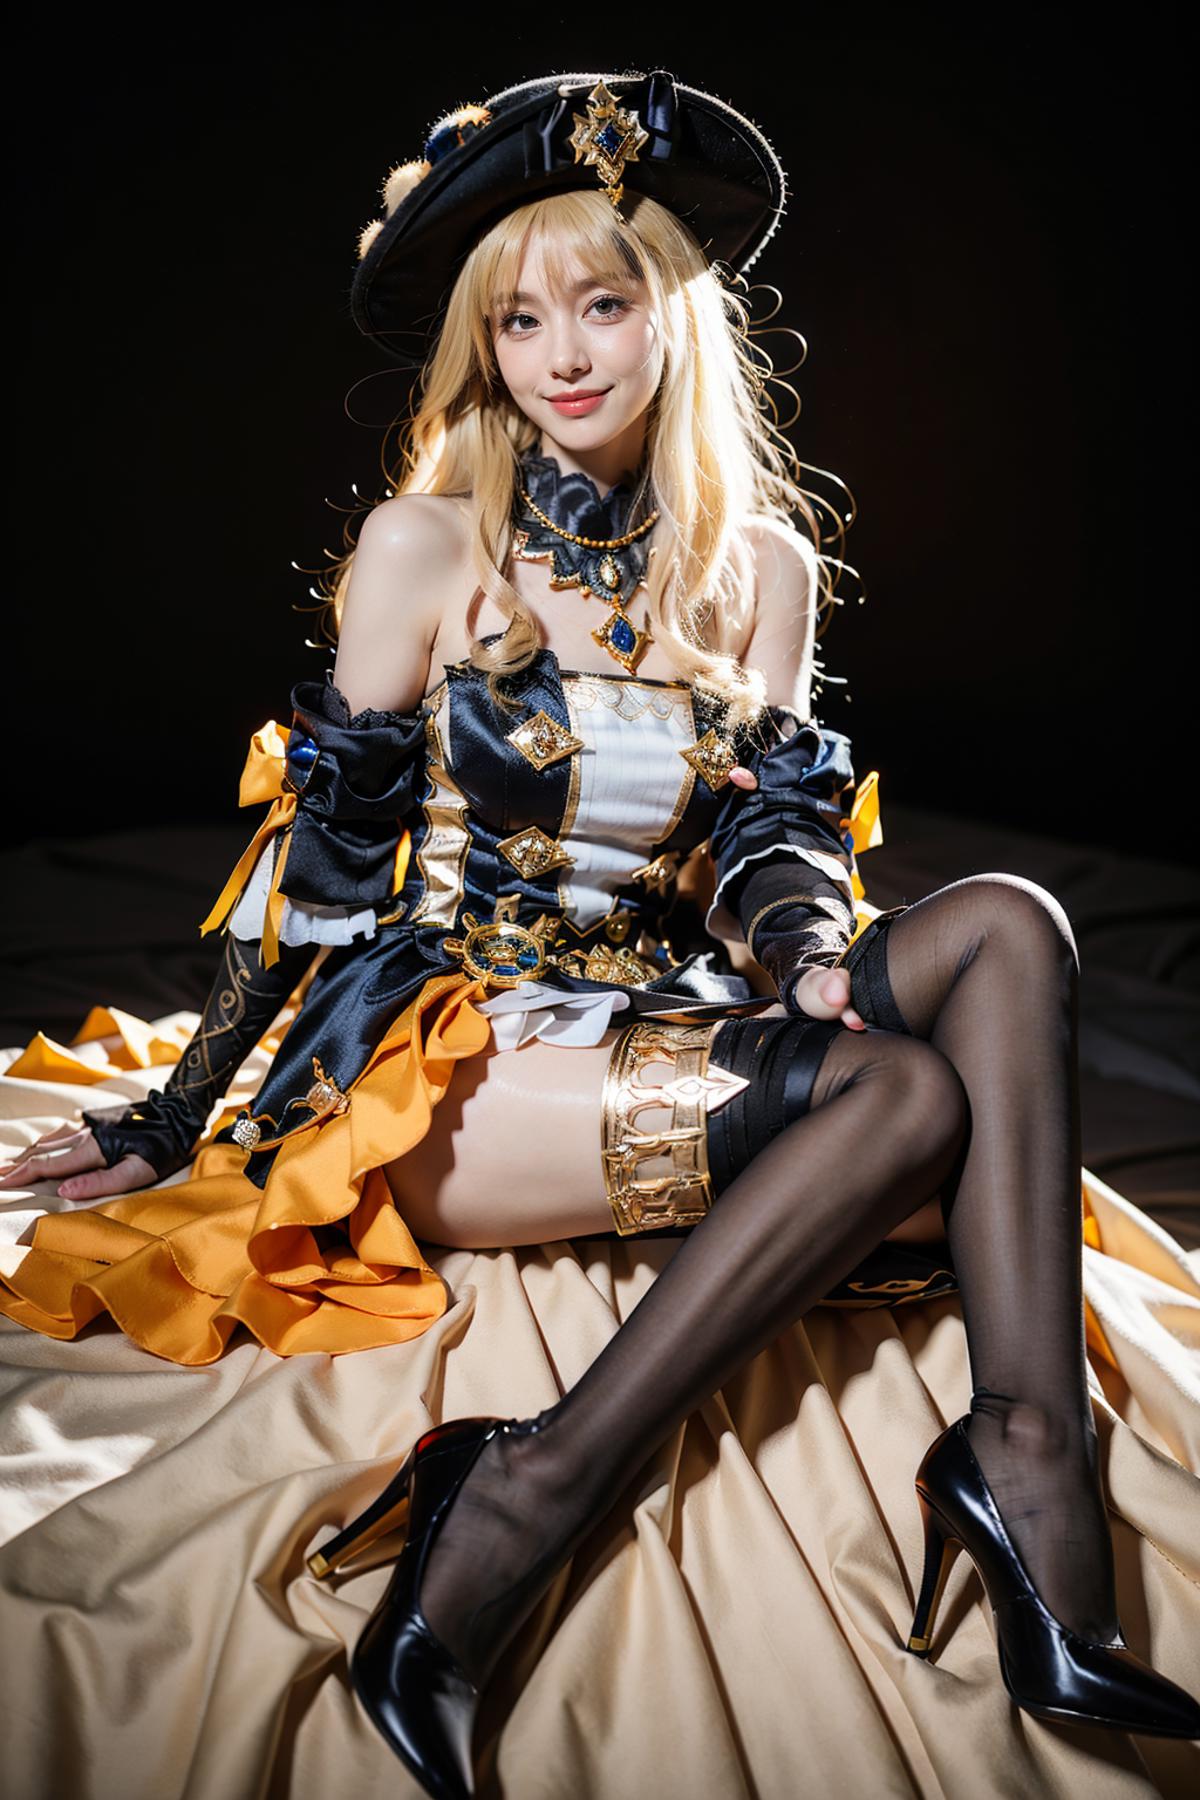 [Realistic] <Genshin Impact> Cosplay costume collection | 原神 cos 服装集合 image by cyberAngel_